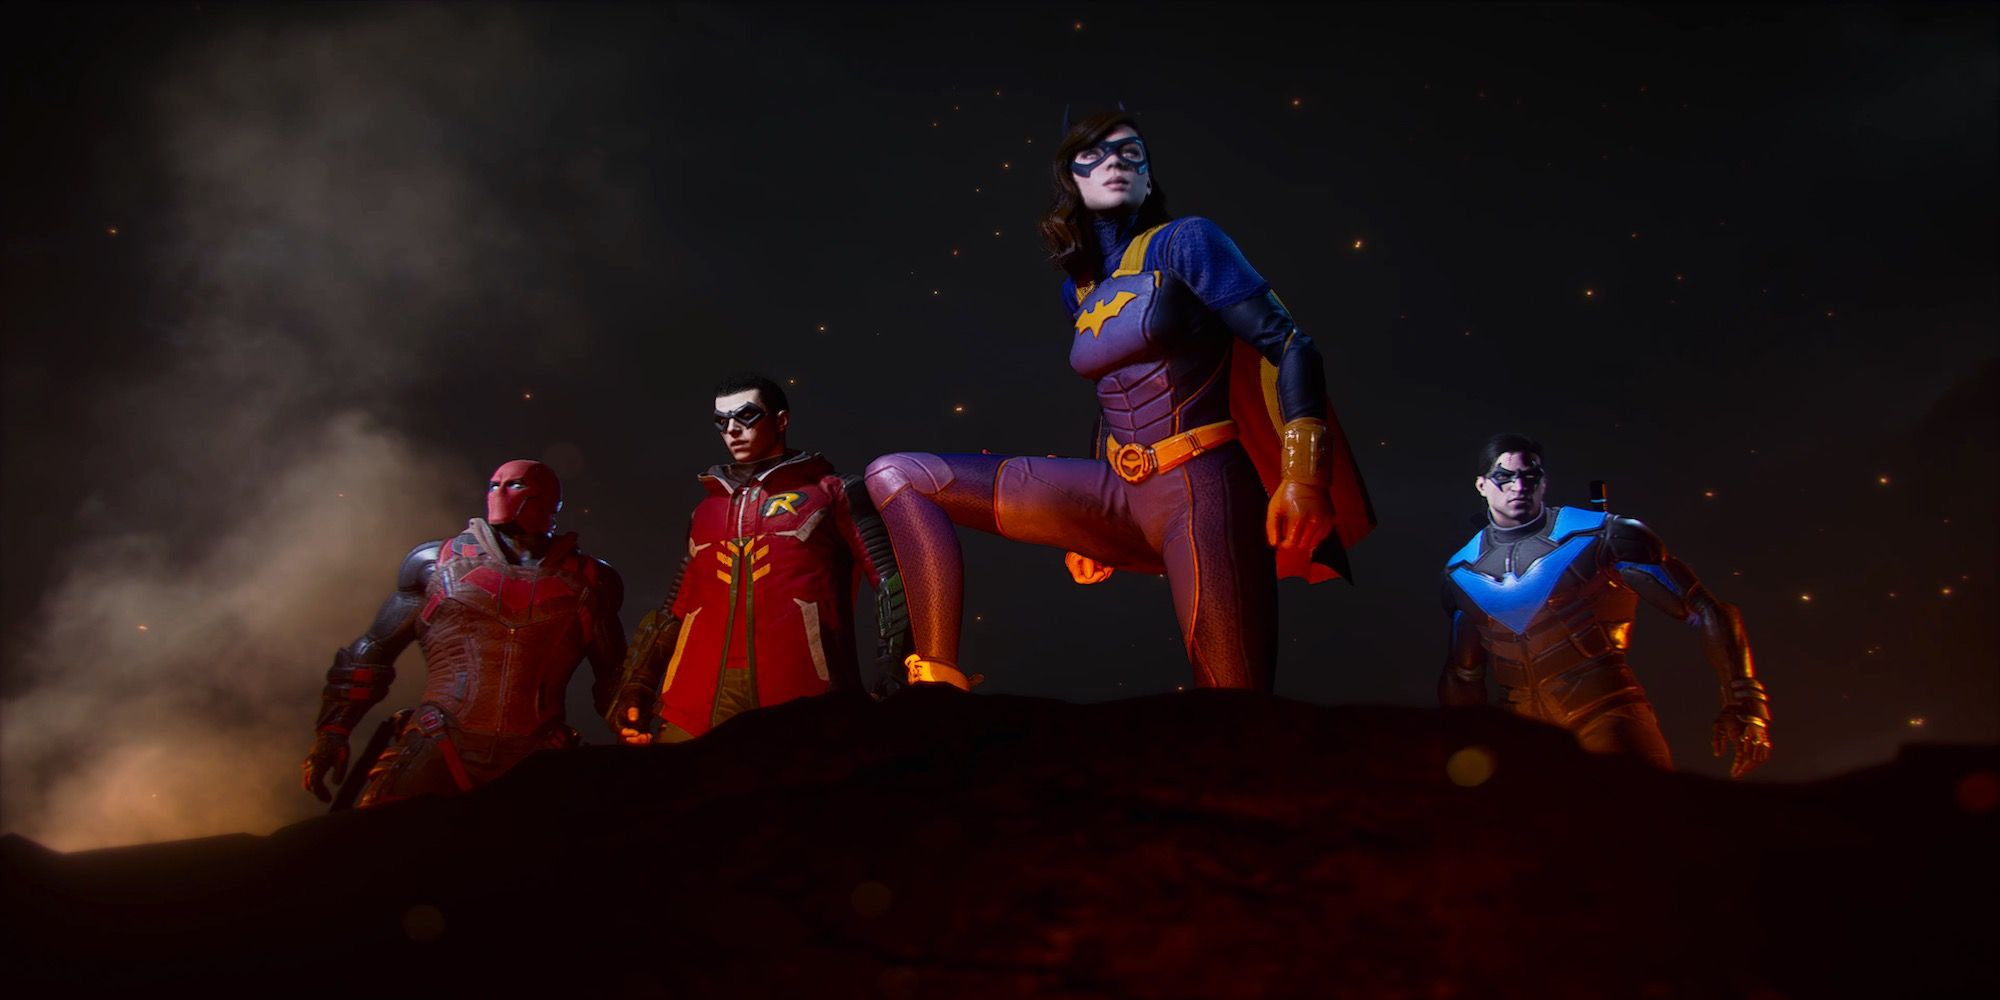 A cutscene featuring characters in Gotham Knights